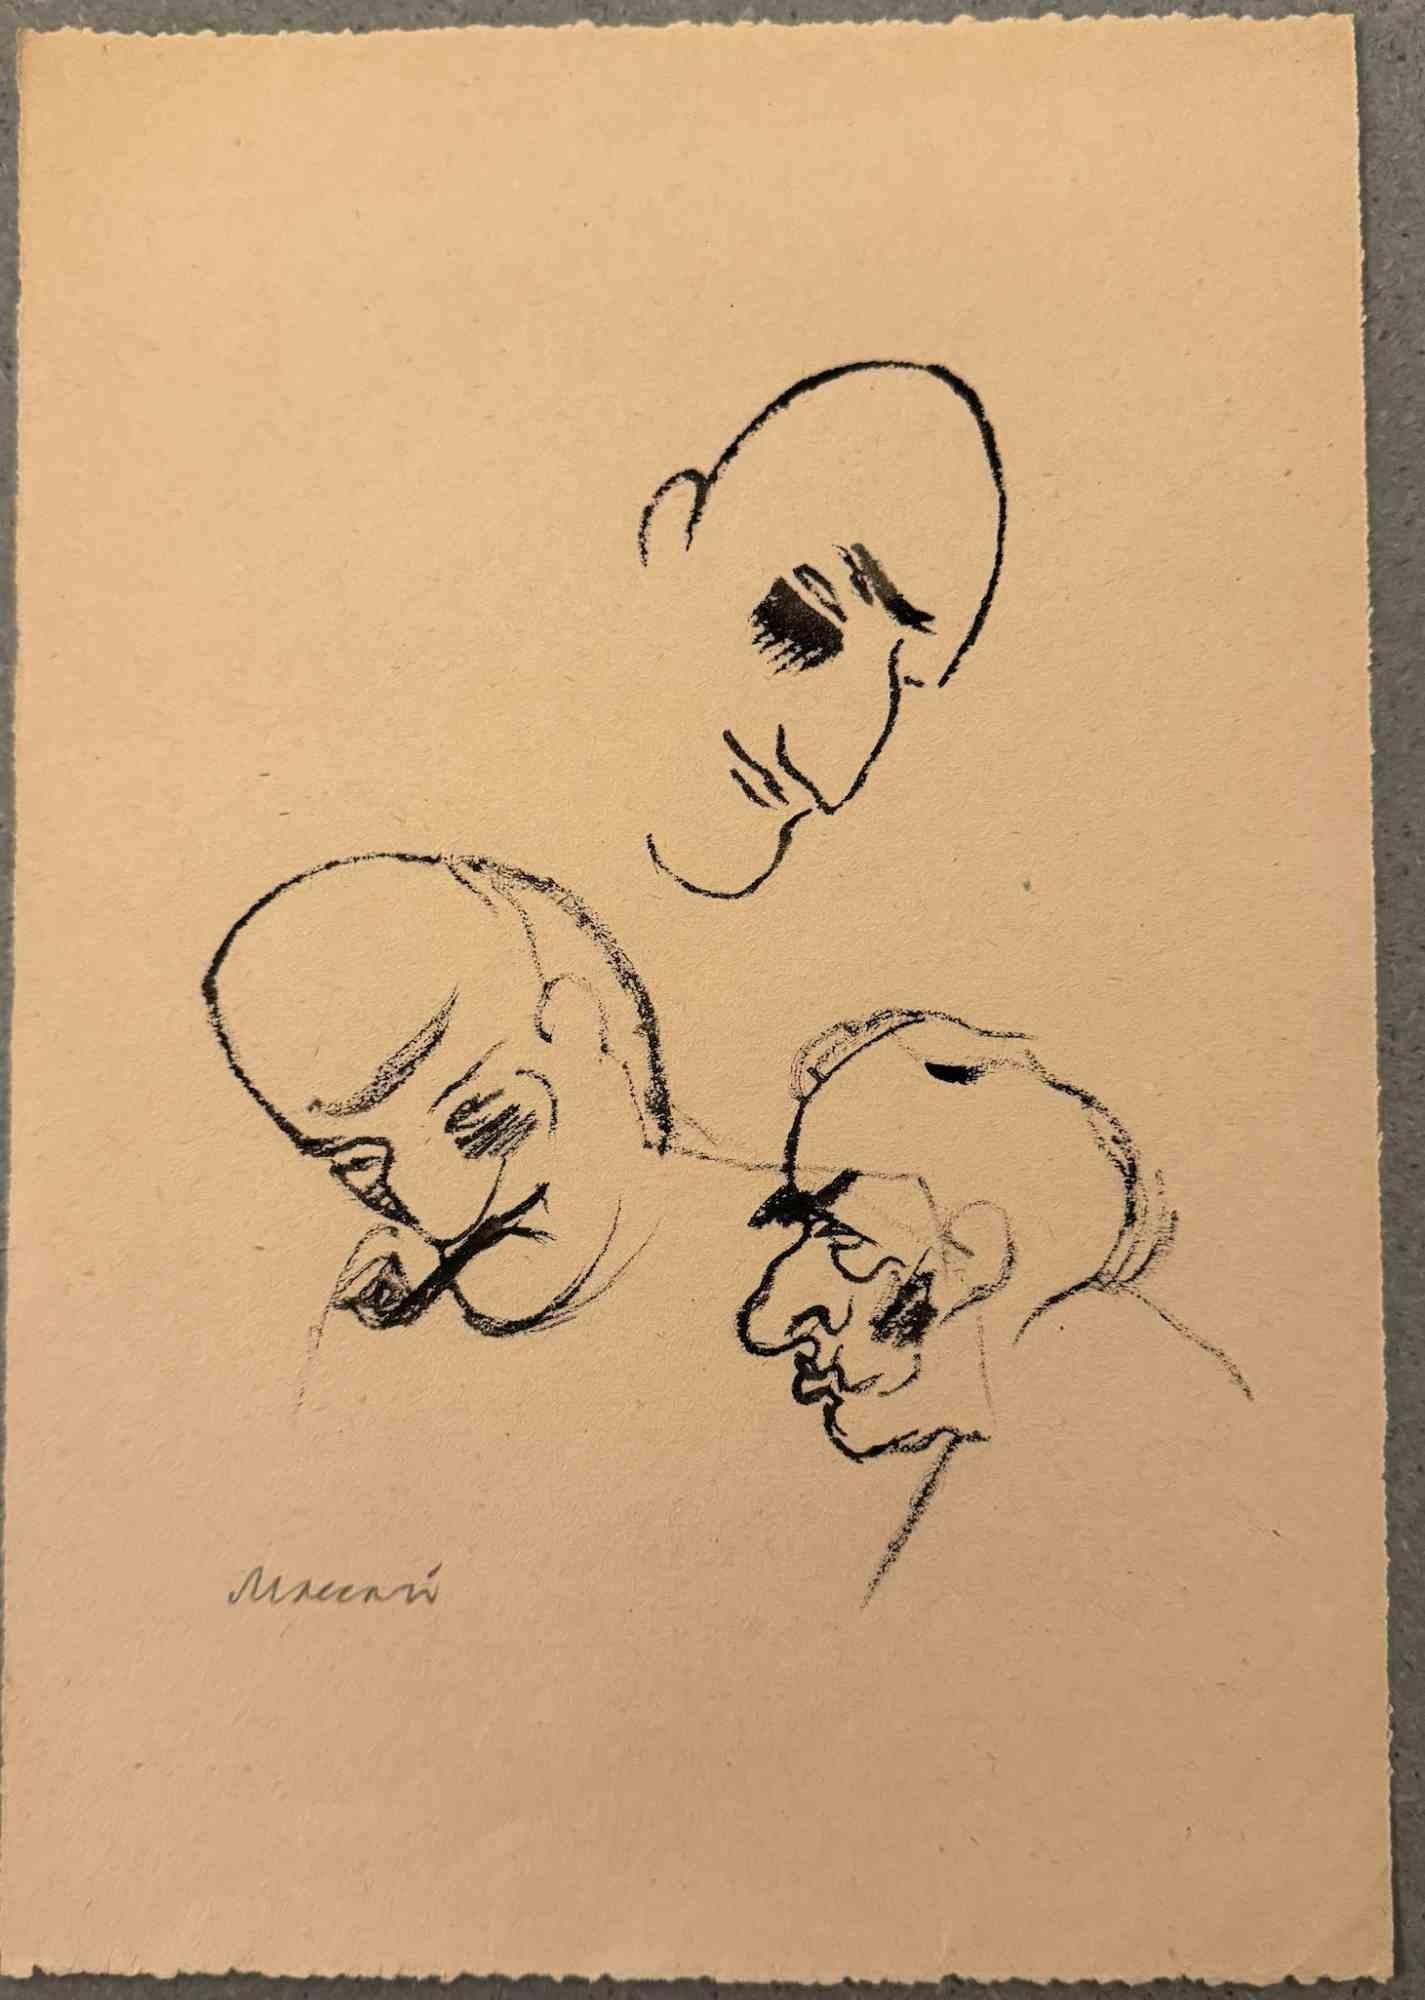 Portraits is a watercolor drawing Artwork realized by Mino Maccari  (1924-1989) in the Mid-20th Century.

Hand-signed.

Good conditions with slight foxing.

Mino Maccari (Siena, 1924-Rome, June 16, 1989) was an Italian writer, painter, engraver and